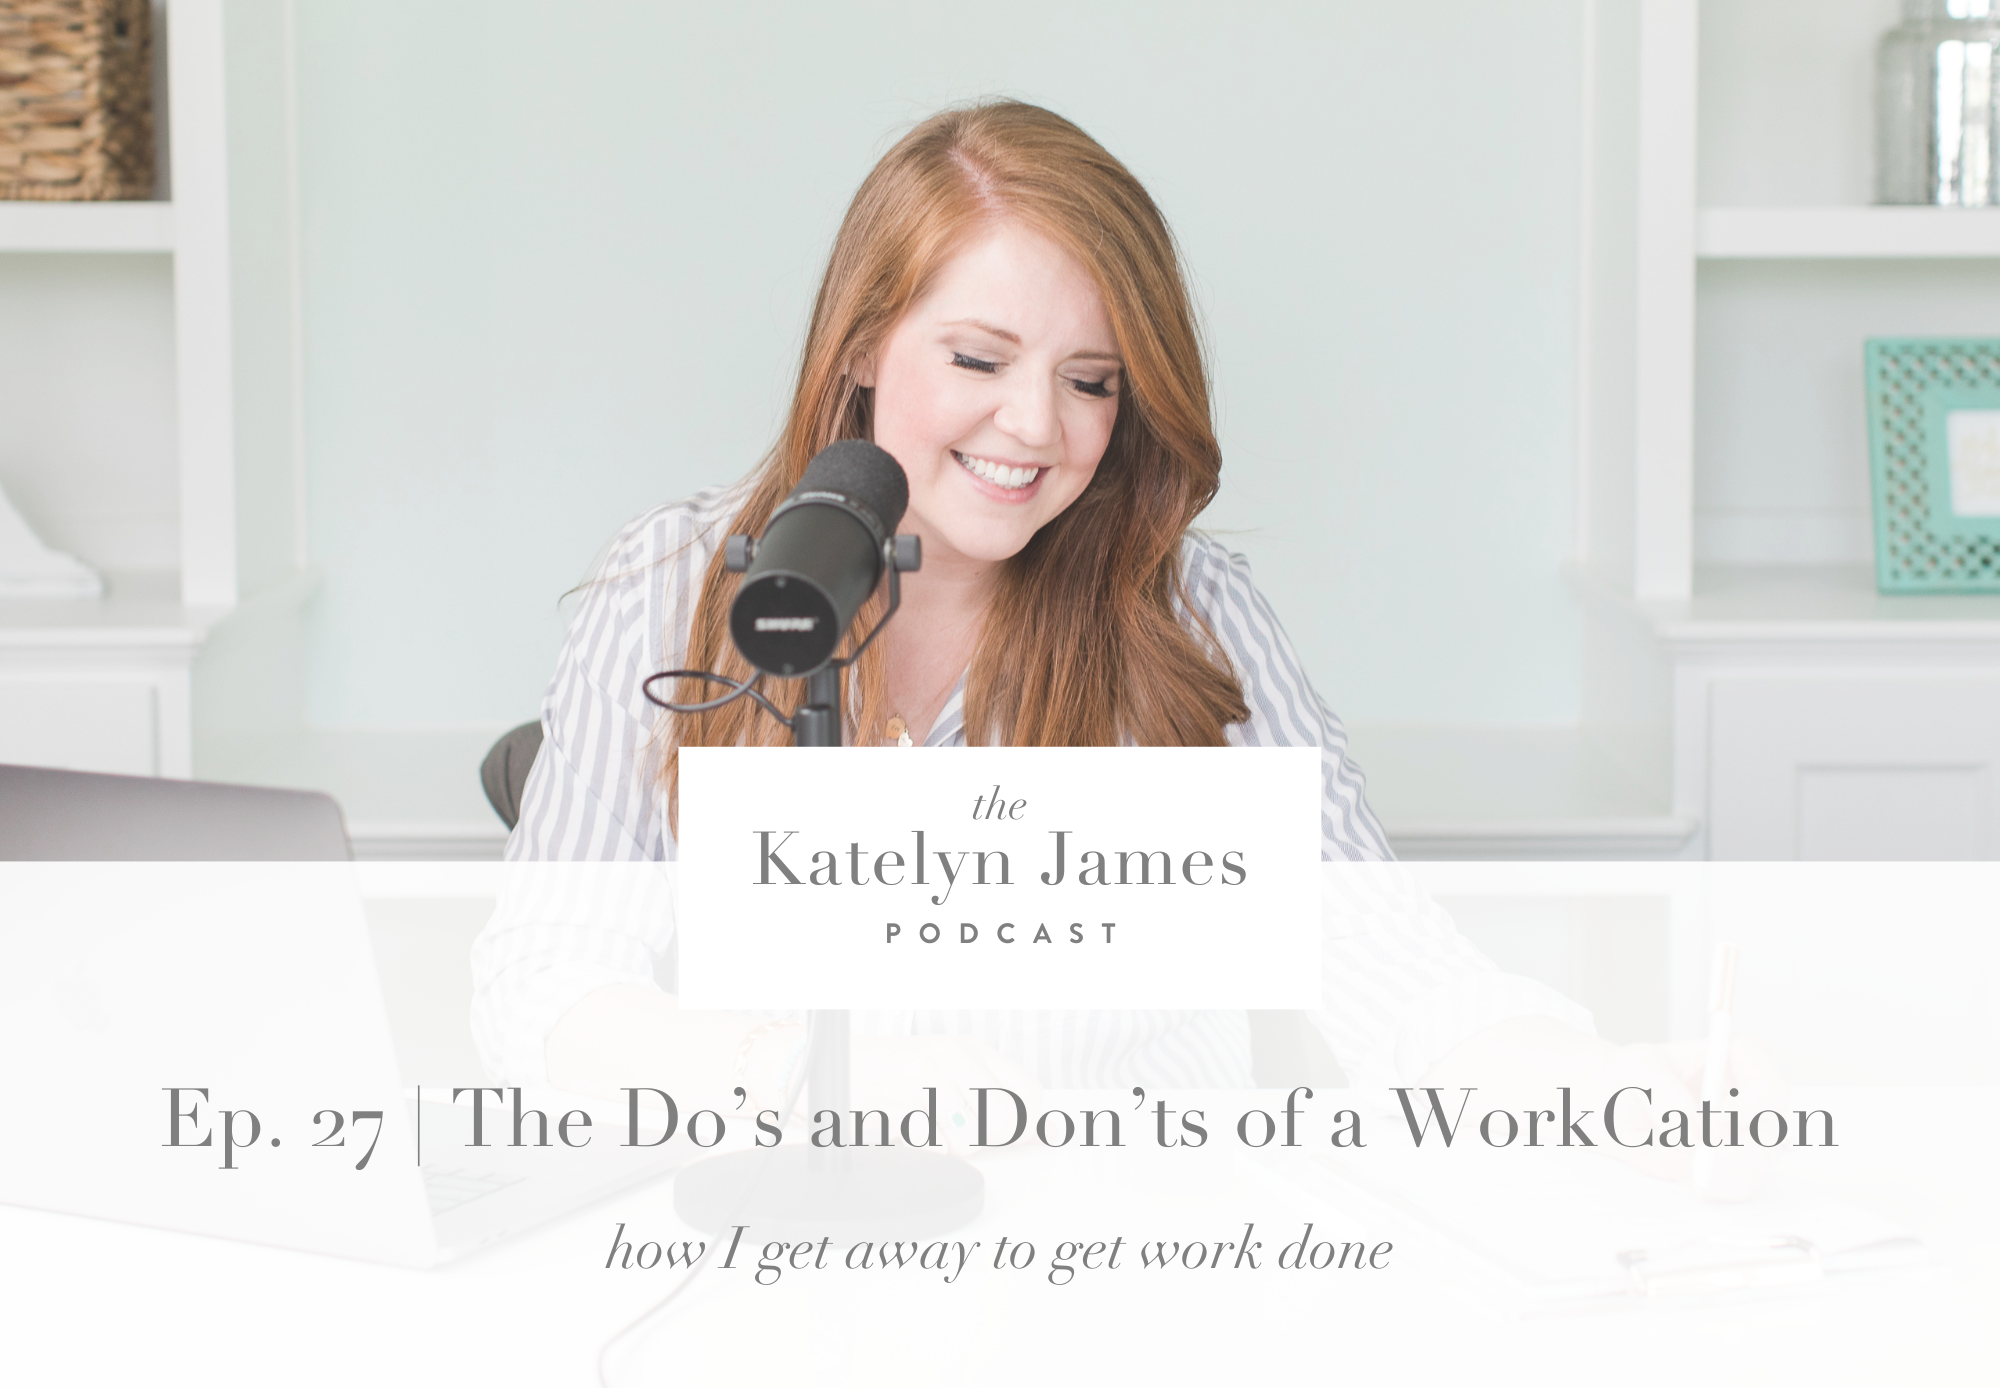 The Do's and Don'ts of a WorkCation